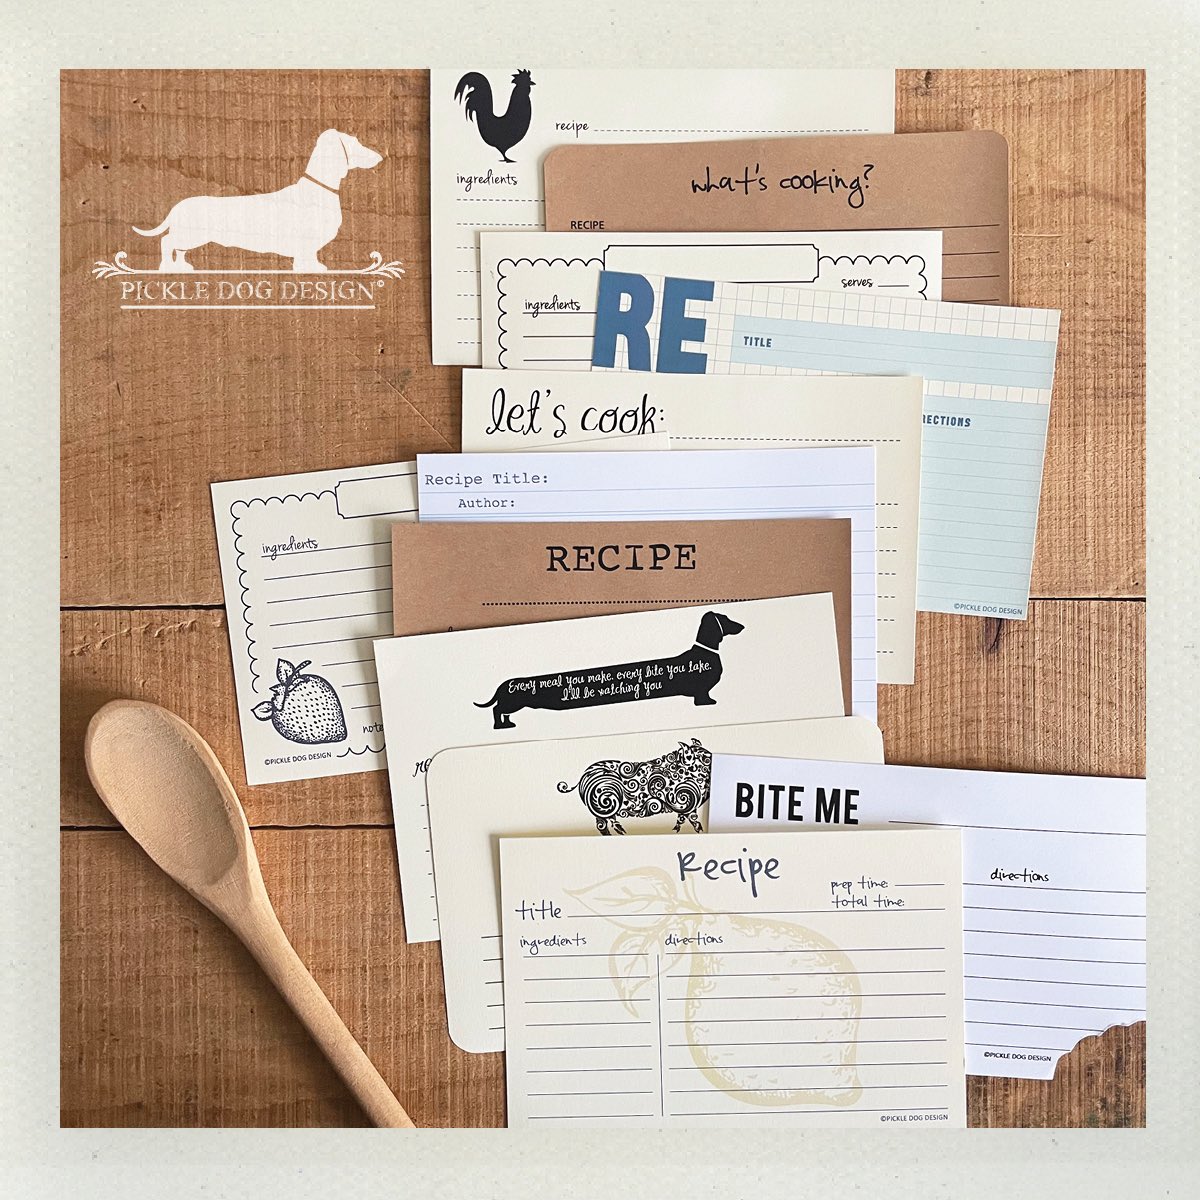 Need a gift idea for Mother’s Day? How about a baker’s dozen variety pack of recipe cards! Under $10 and ships FREE next day: etsy.com/listing/673790…

#recipecards #cards #recipecard #recipe #giftforher #mothersday #dachshund #happymothersday #mothersdaygift #giftformom